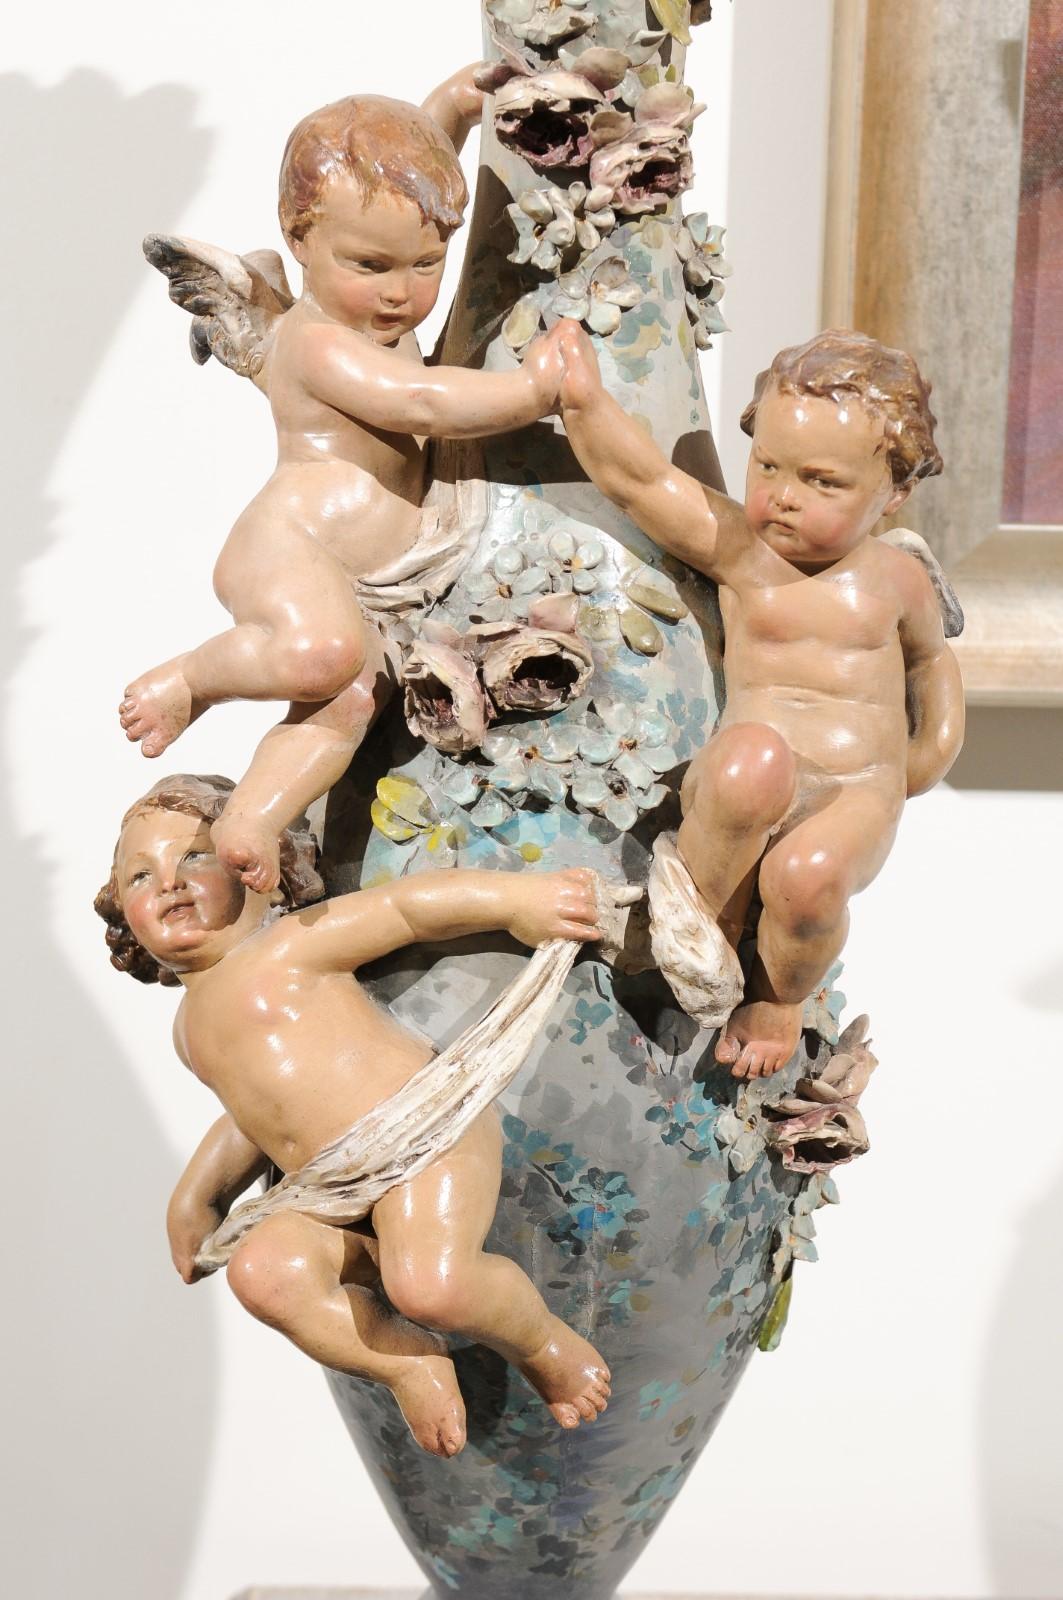 French 1870s Slender Majolica Vase with Floral Décor and High-Relief Cherubs For Sale 5